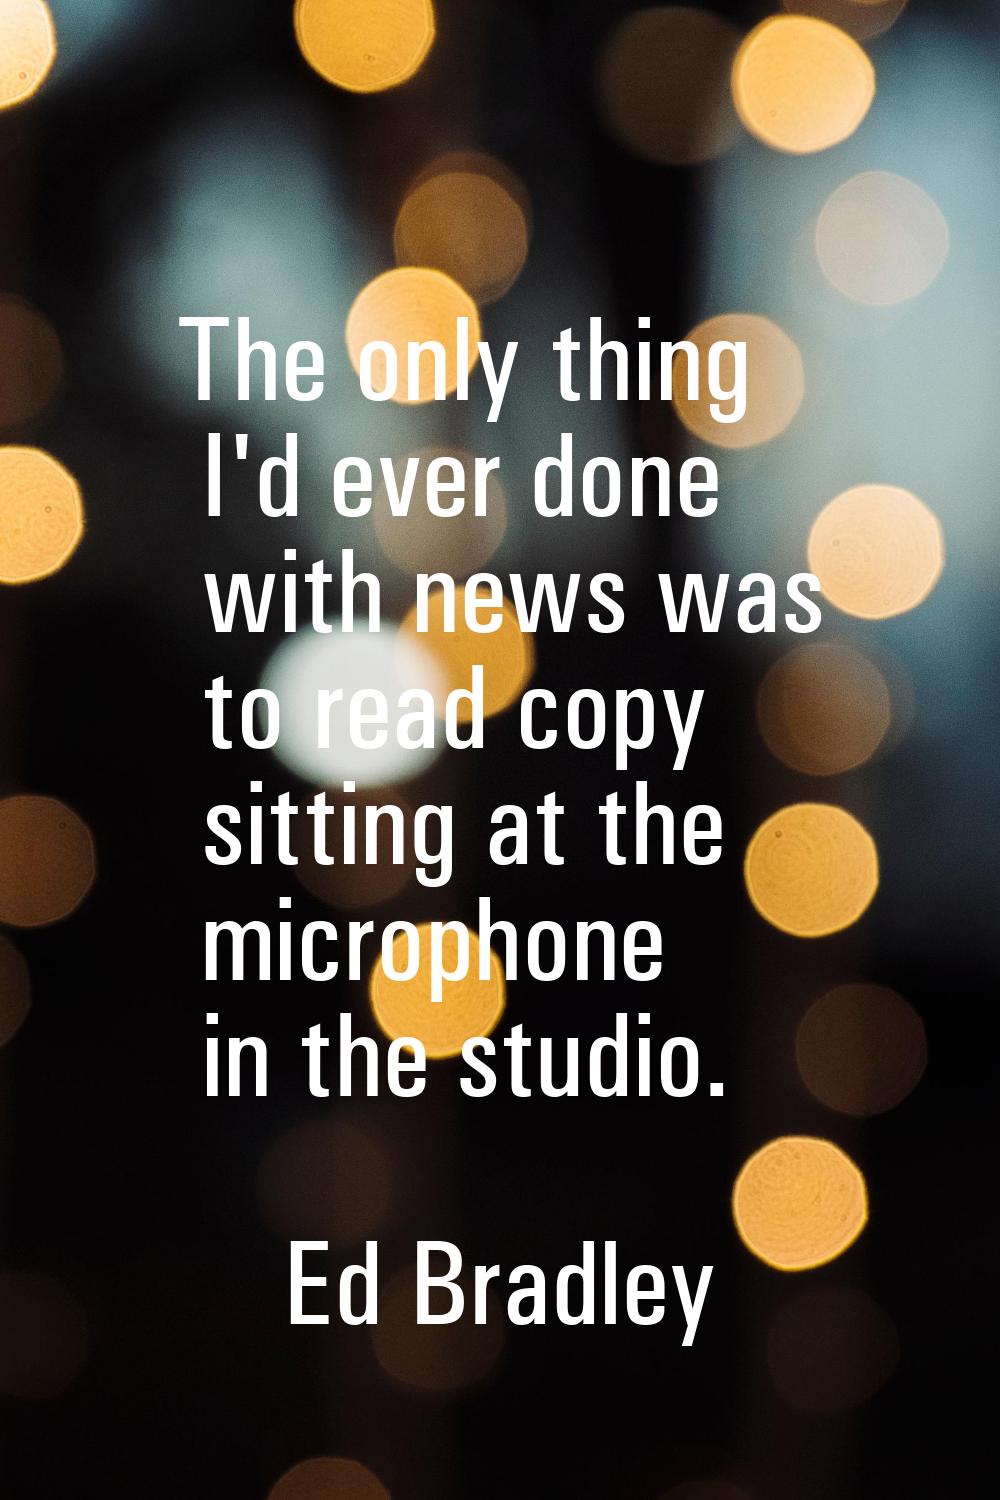 The only thing I'd ever done with news was to read copy sitting at the microphone in the studio.